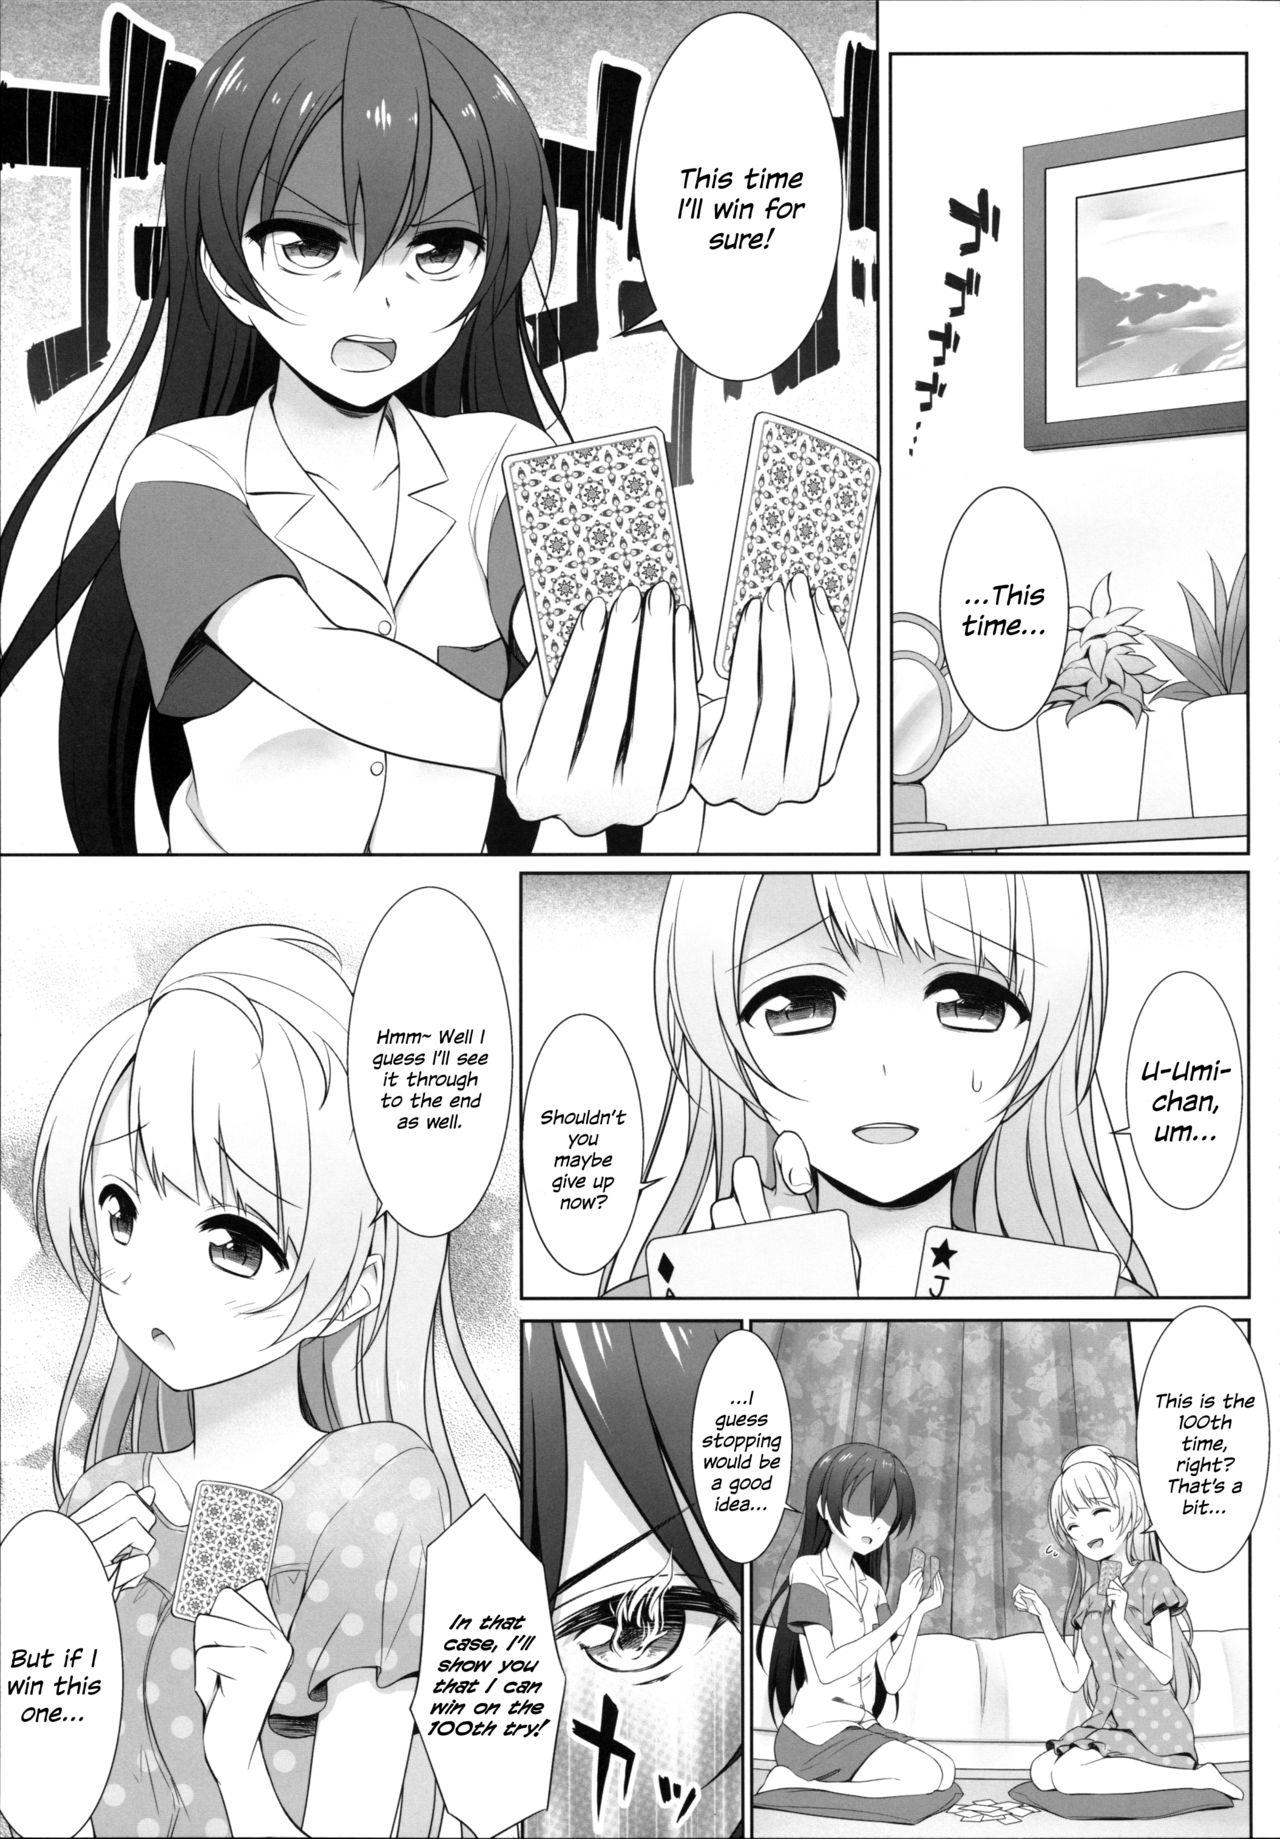 Perfect Pussy Batsu Game wa Solo Sex | The Forfeit is a Solo Performance - Love live Porno 18 - Page 5